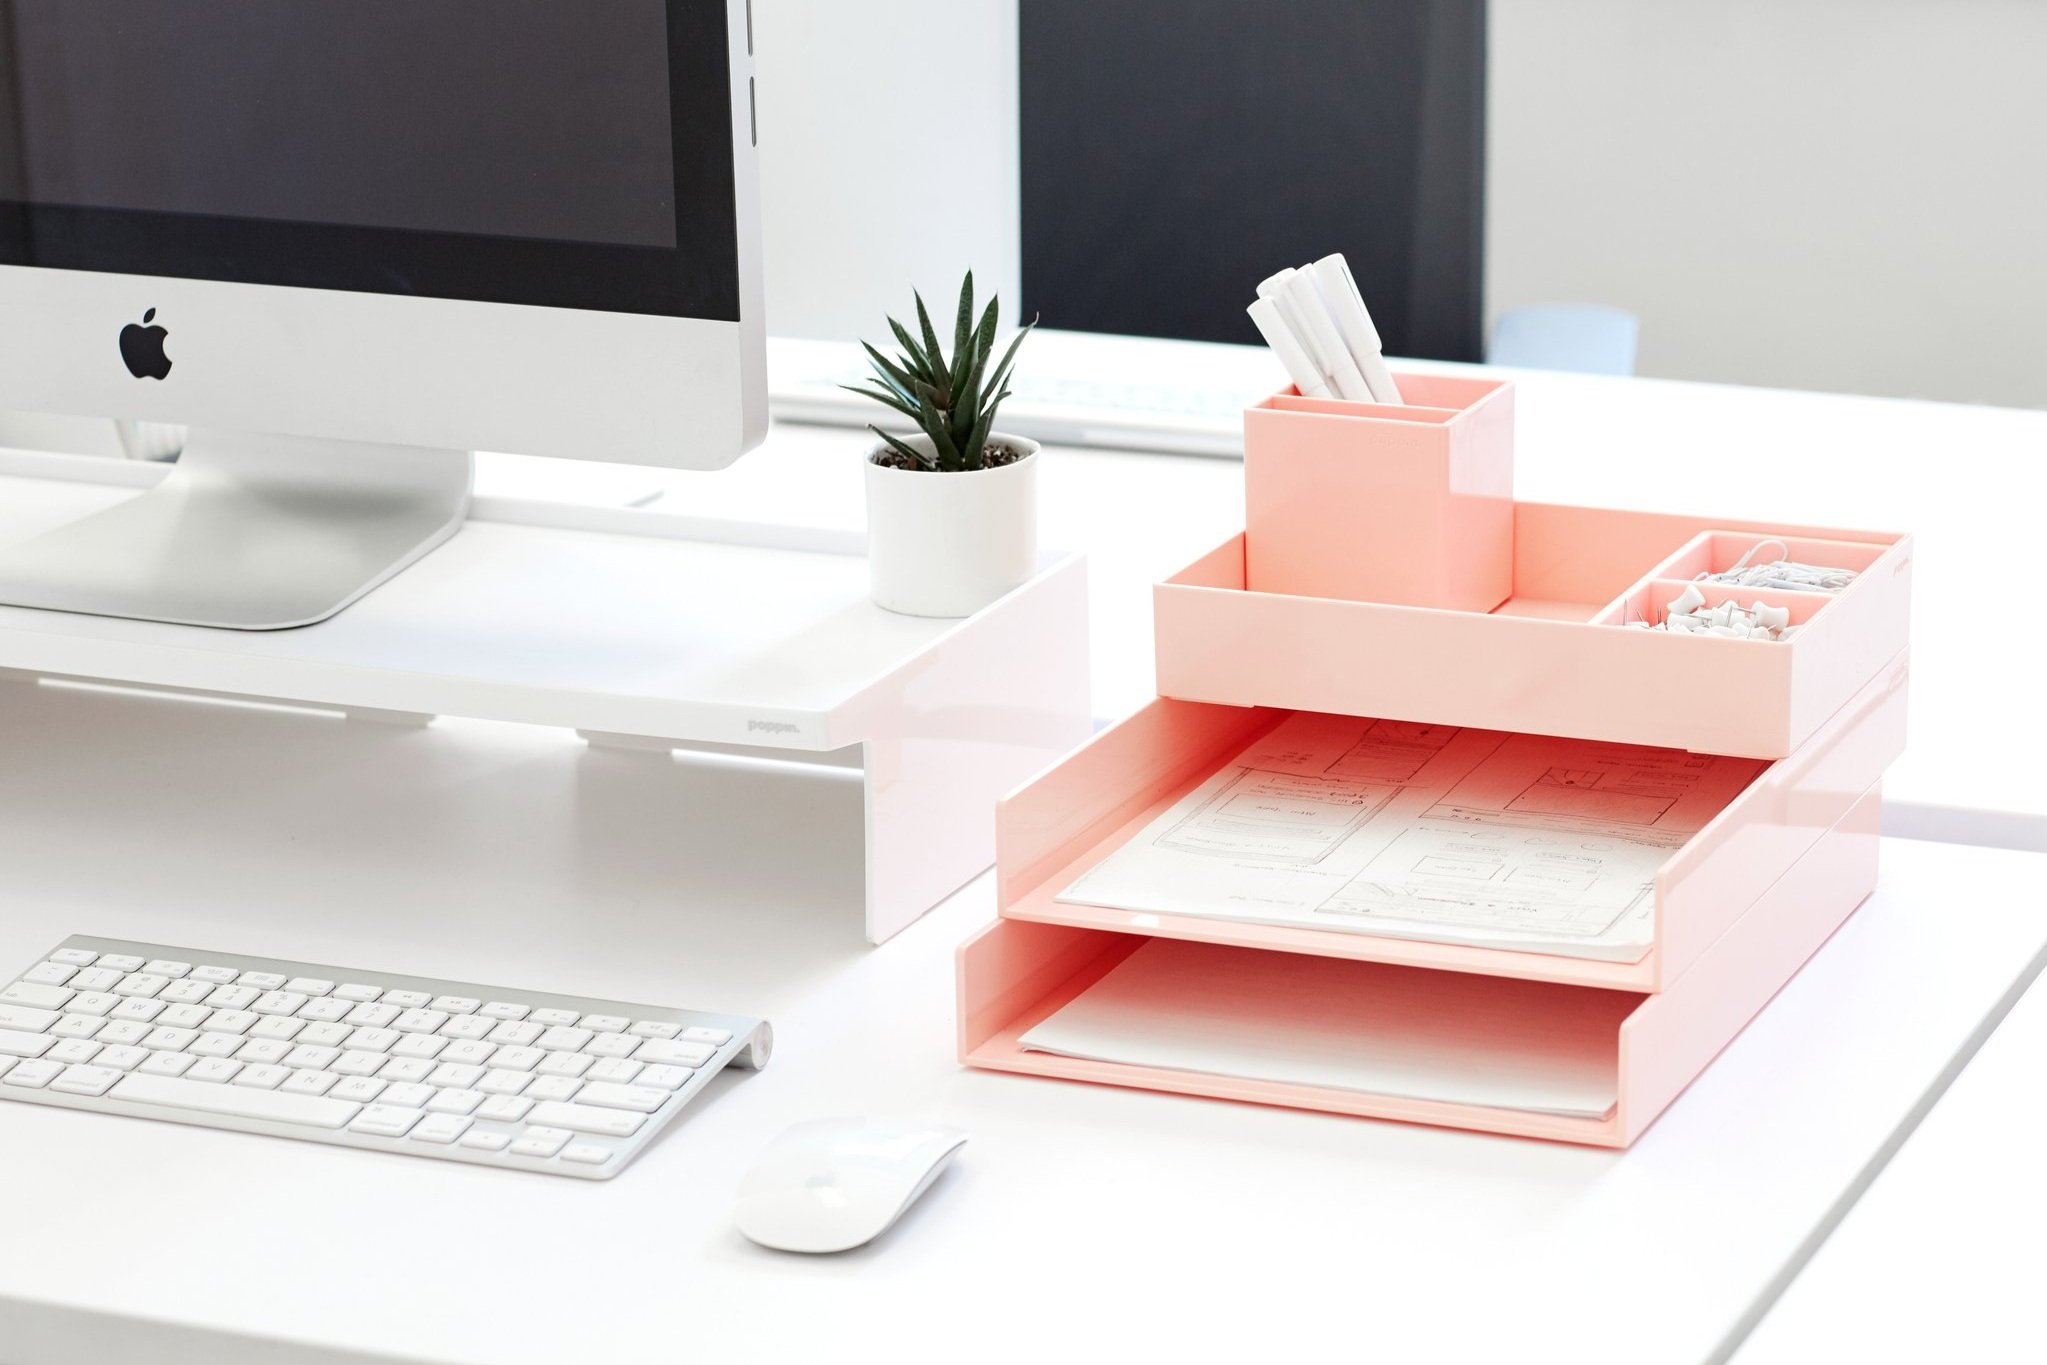 Poppin's Sleek Office Supplies Make You Want To Work At Your Desk